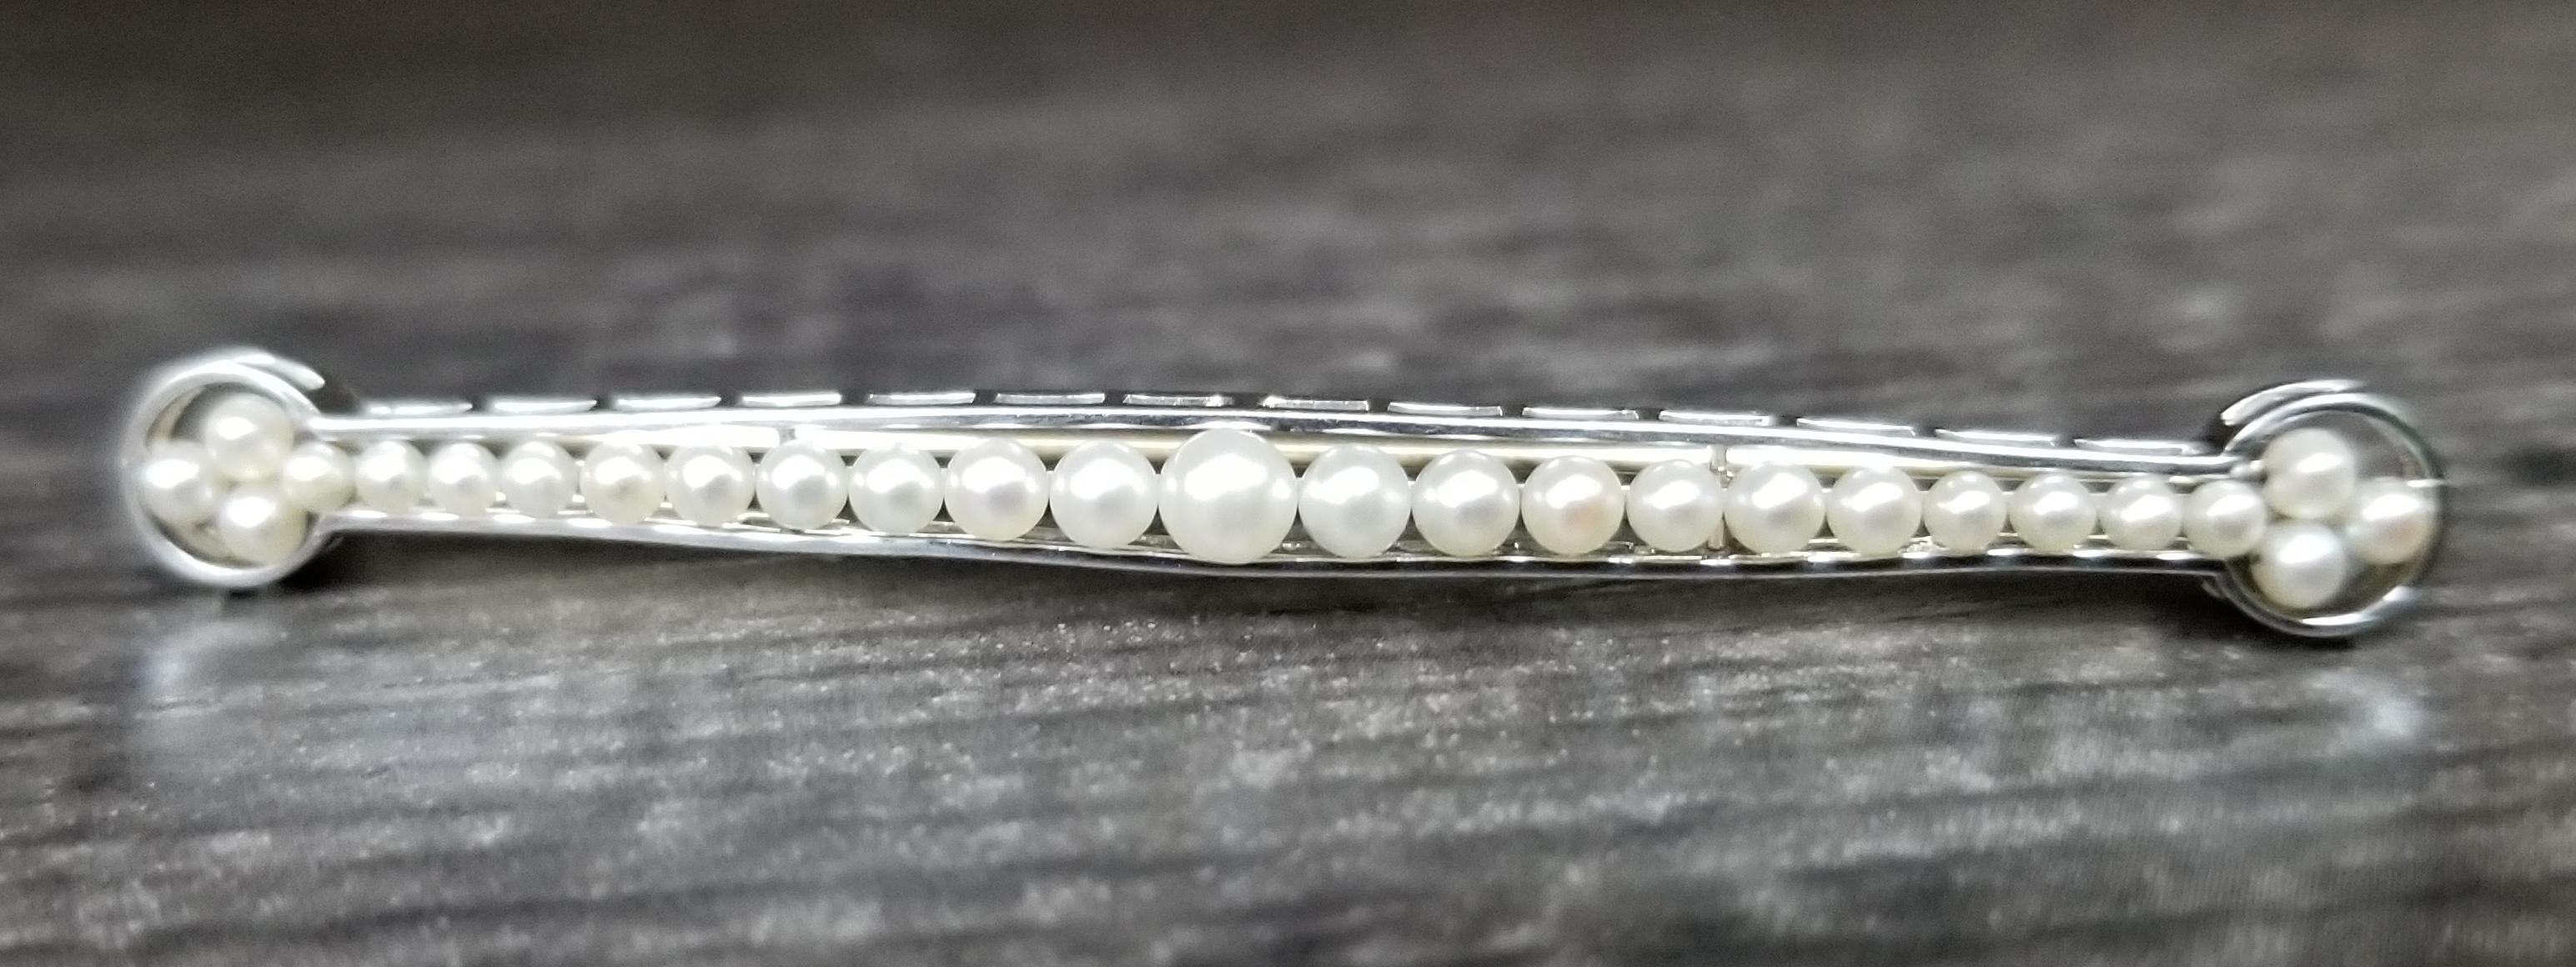 14k white gold sea pearl pin with 27 graduating sea pearls from 1.5mm to 3mm. 